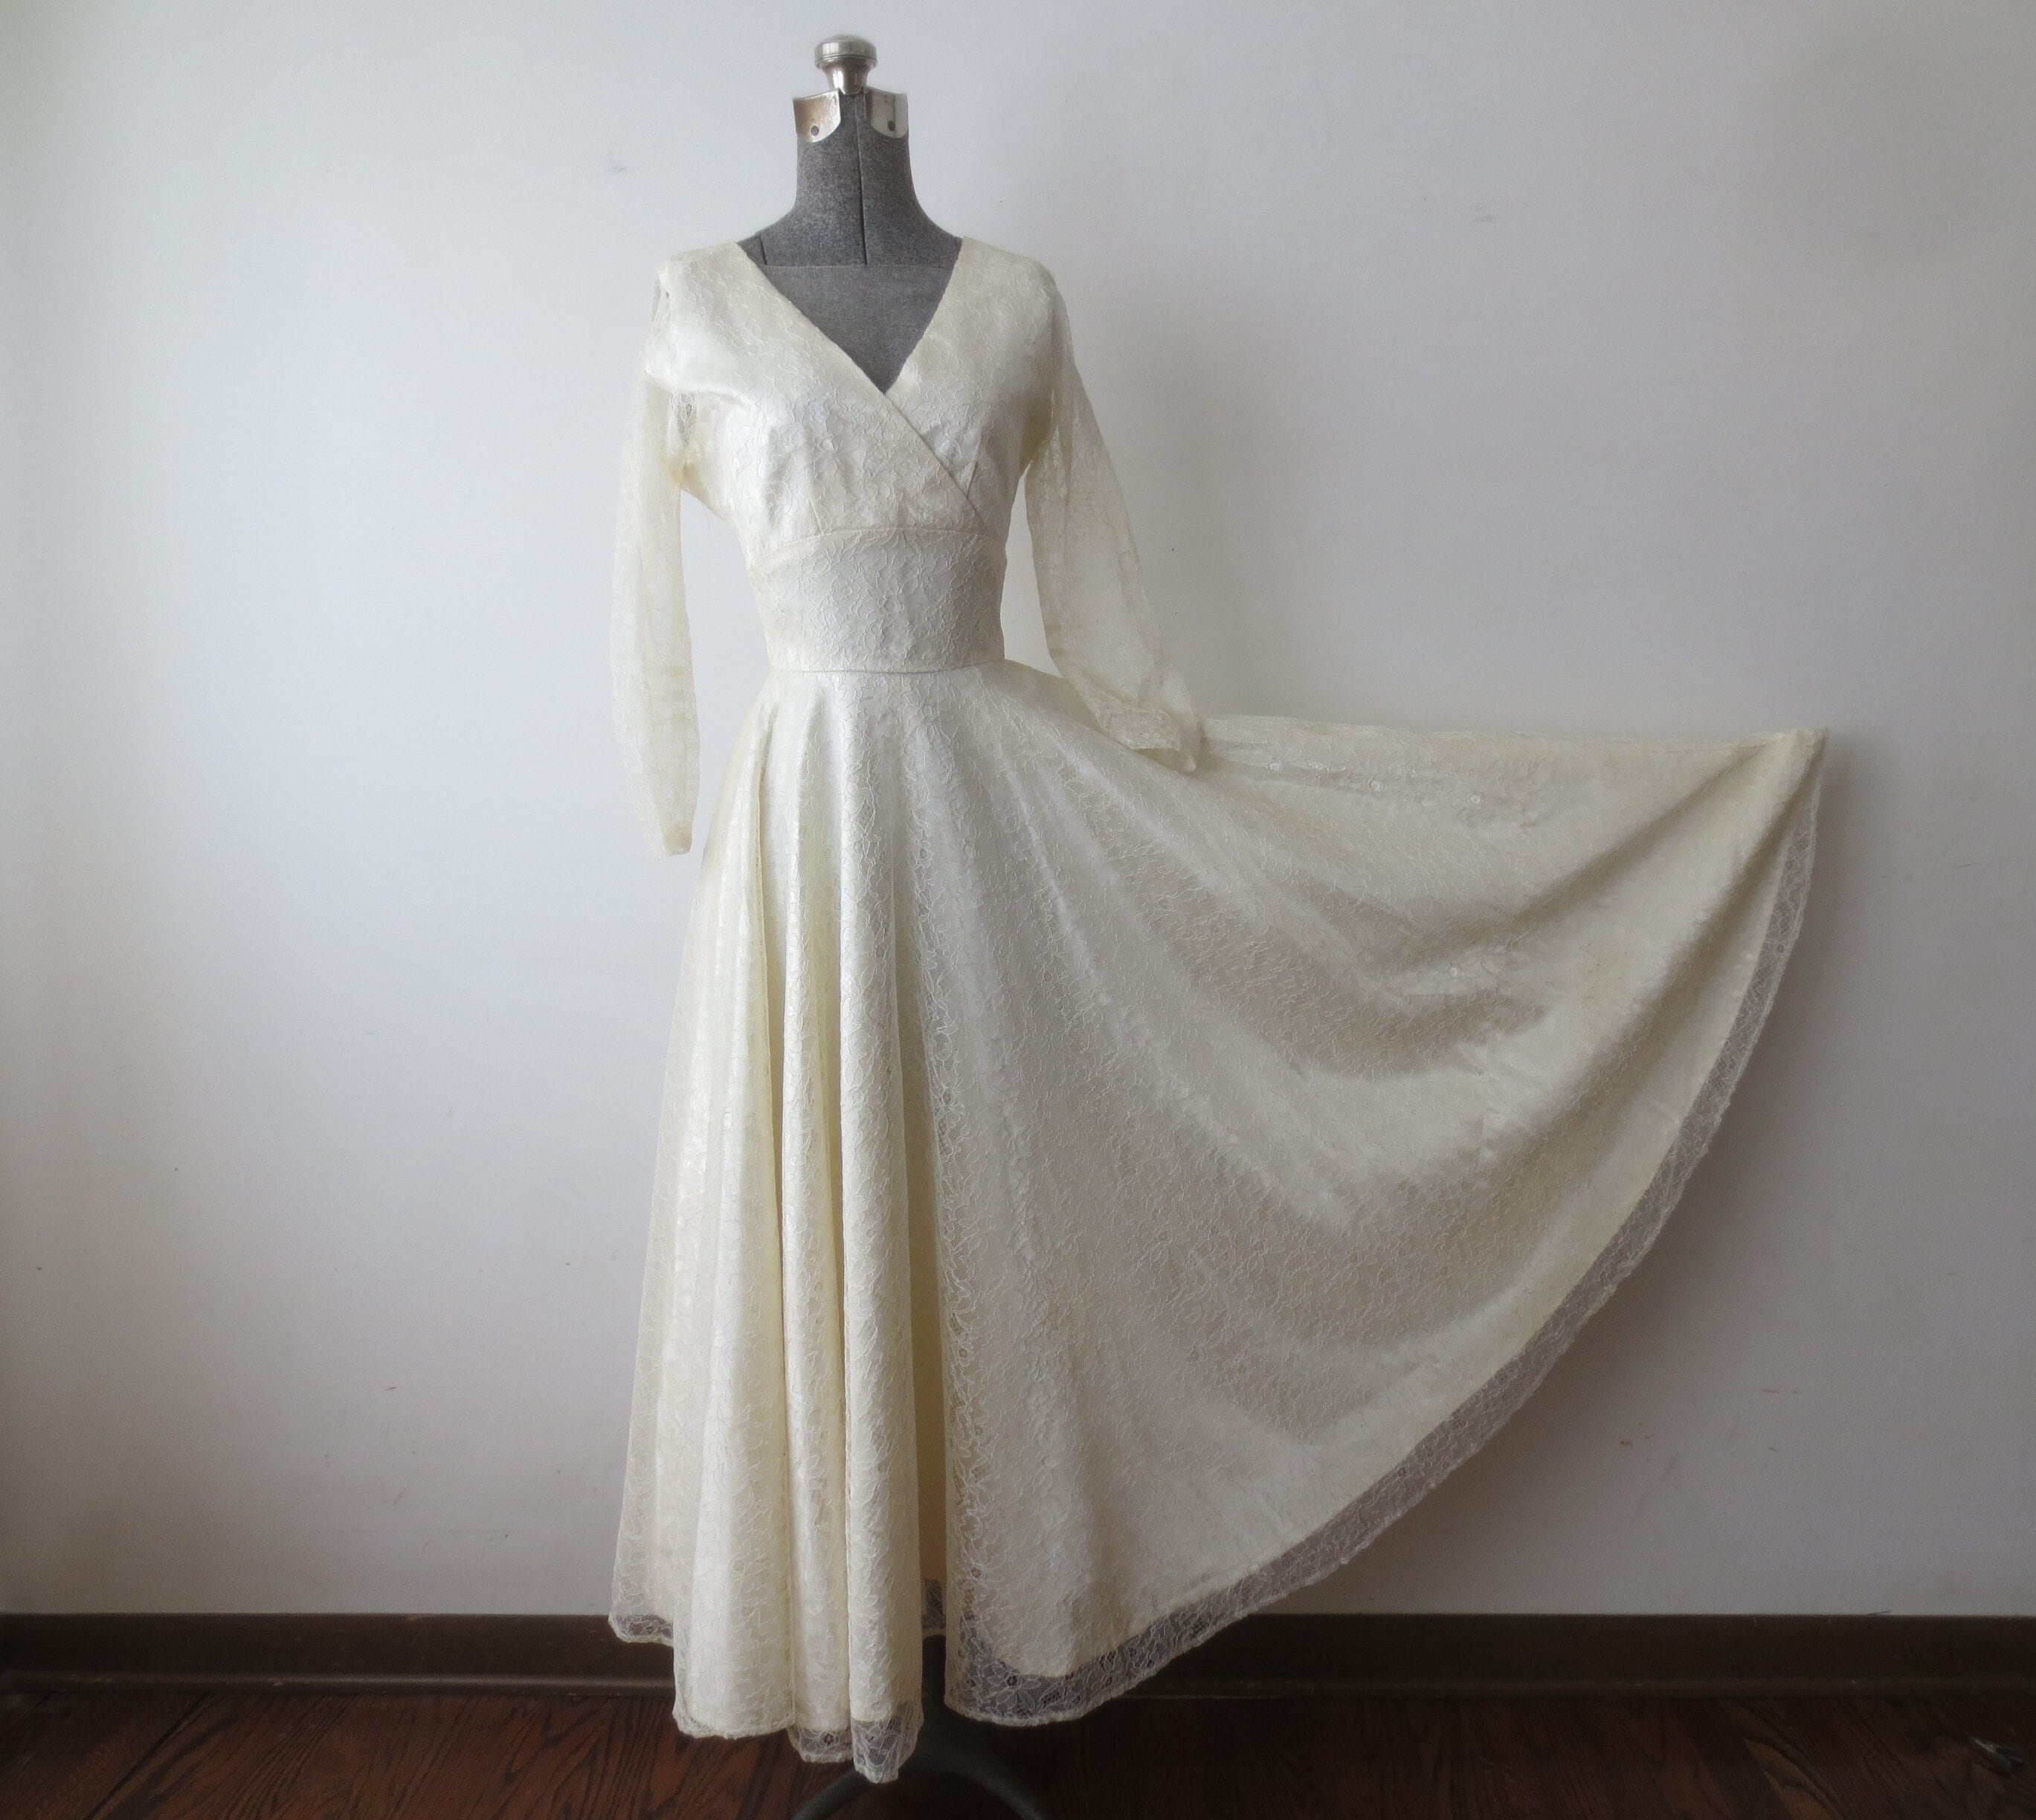 50s Tea Length Vintage Lace Wedding Dress Full Skirt. Small Bust/ Waist  Approx 4/6 UK Very Lovely Cotton Lace, Scoop Neck and Long Sleeves 